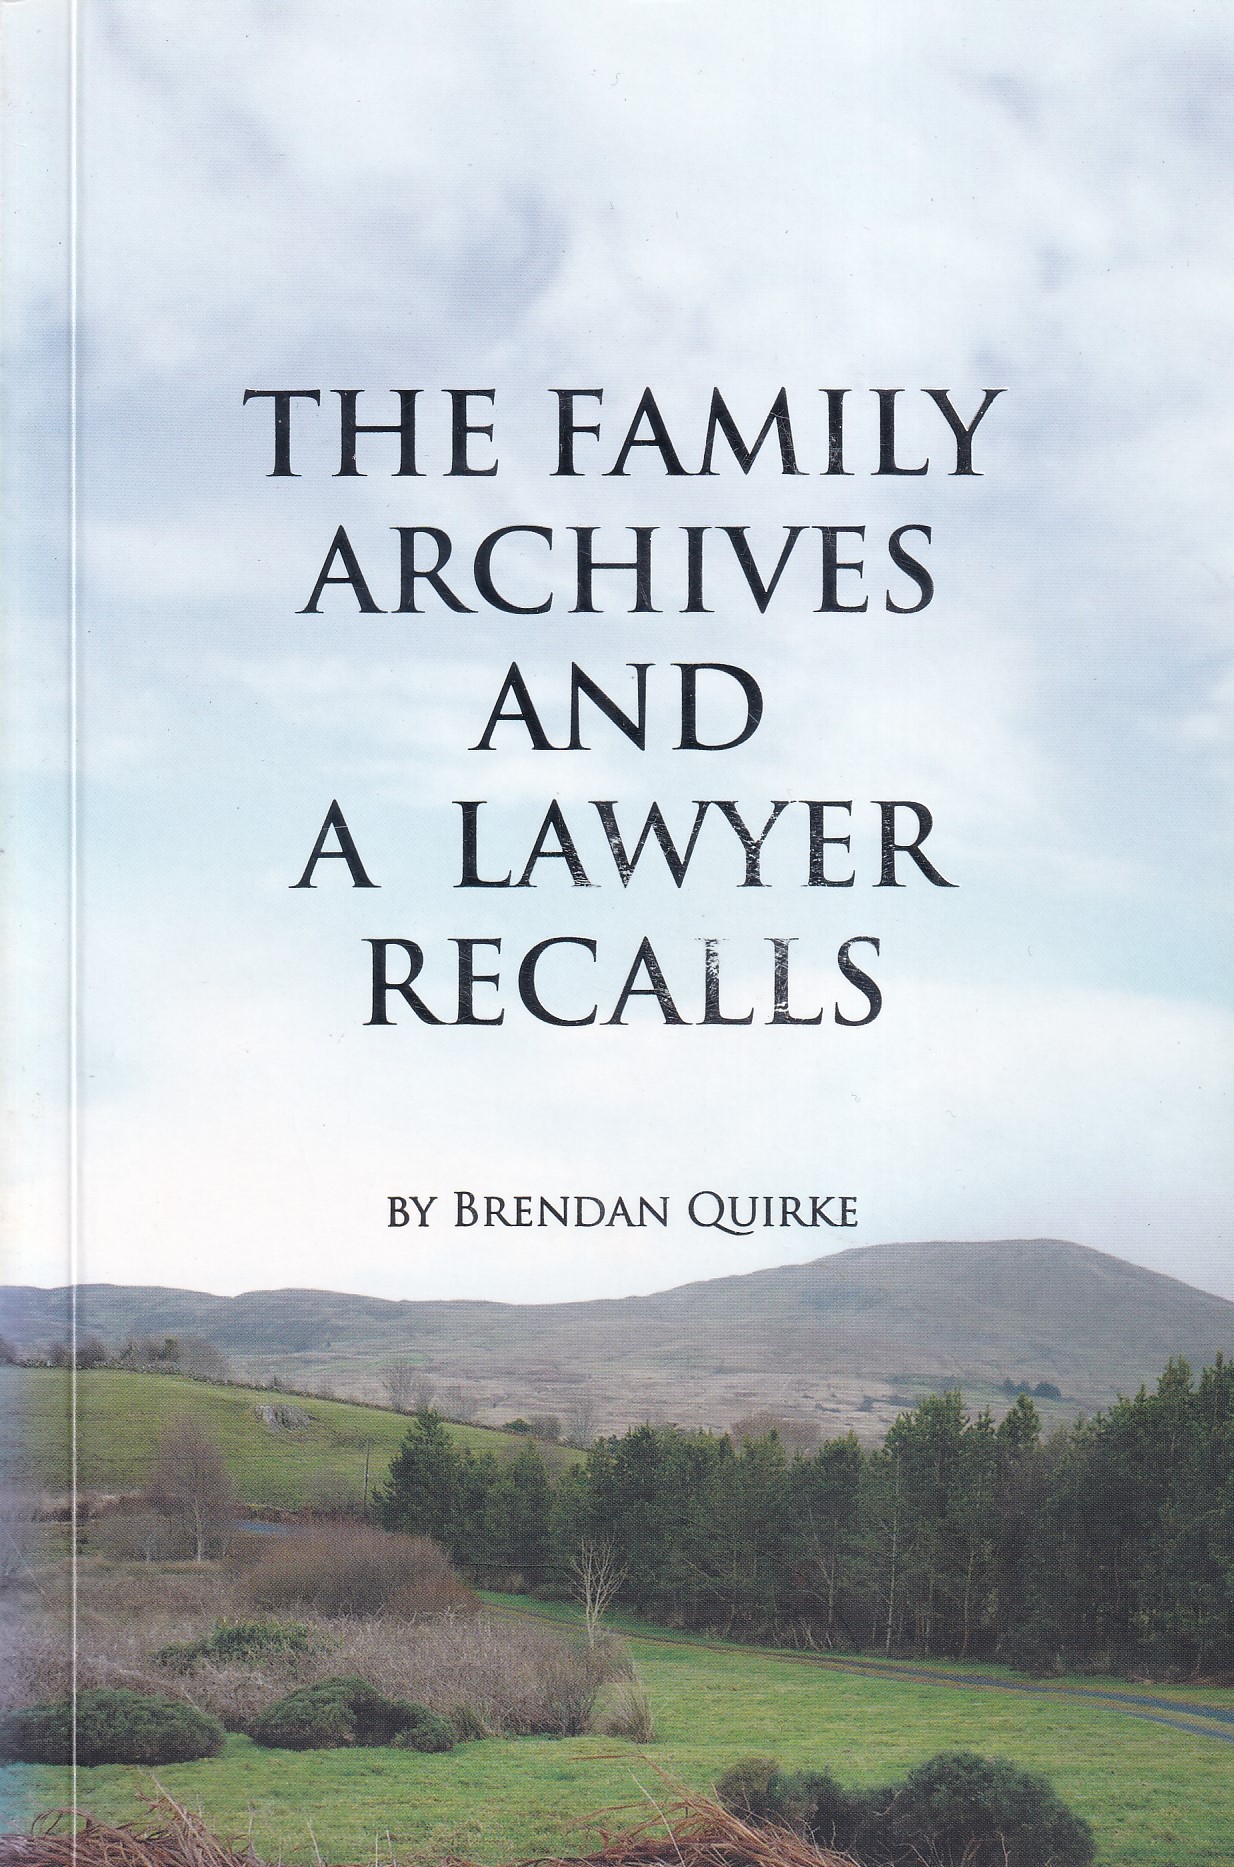 The Family Archives and A Lawyer Recalls by Brendan Quirke